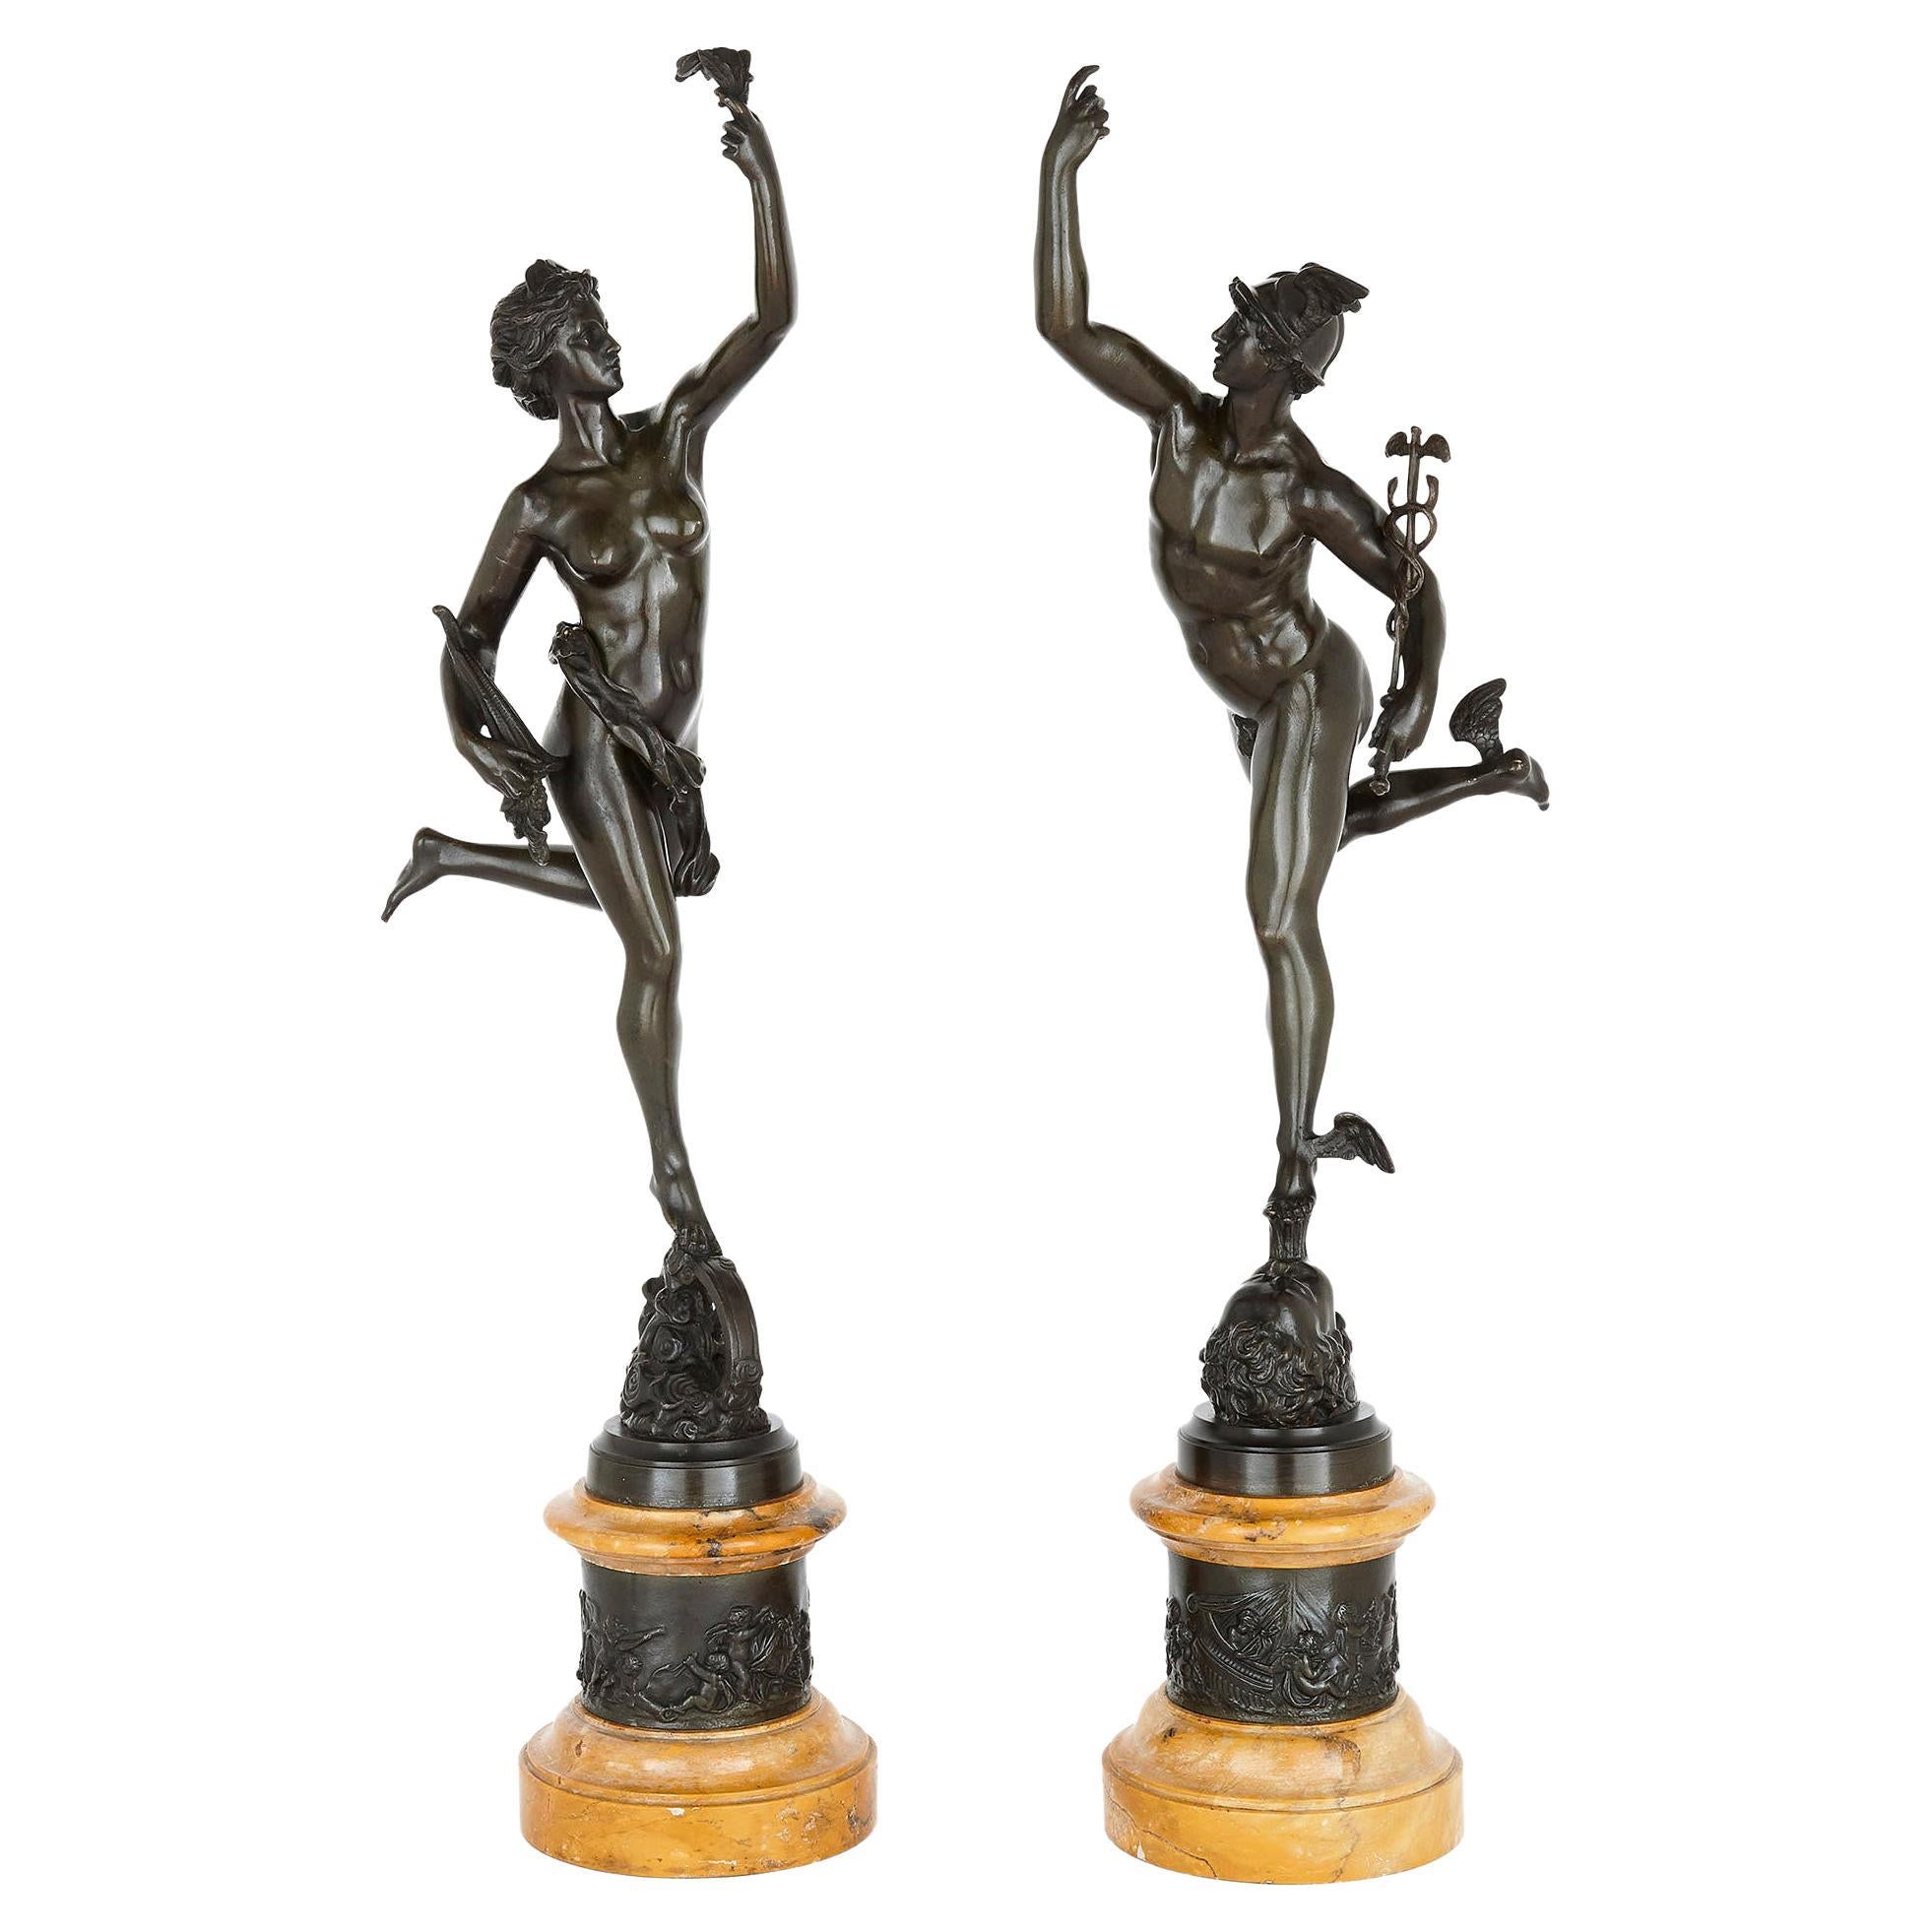 Pair of Patinated Bronze Figures After Giambologna